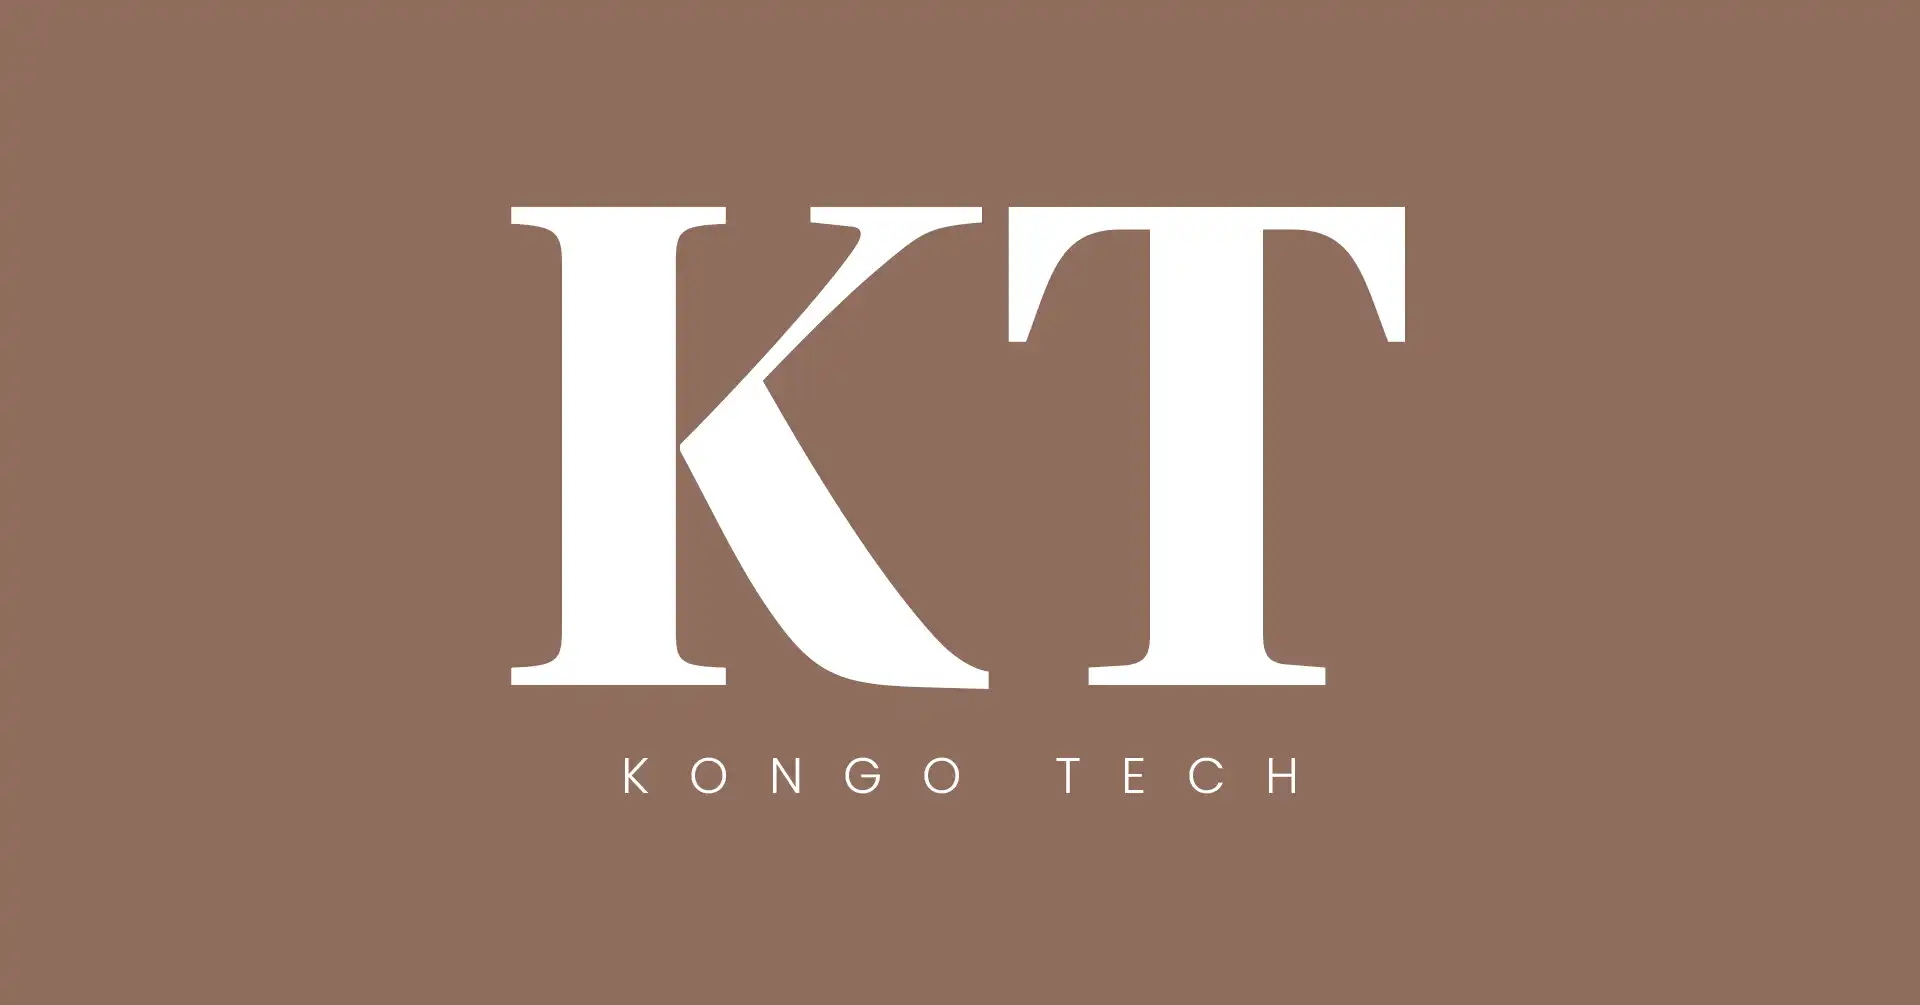 How does Kongo Tech ensure diversity and inclusion in its workforce?